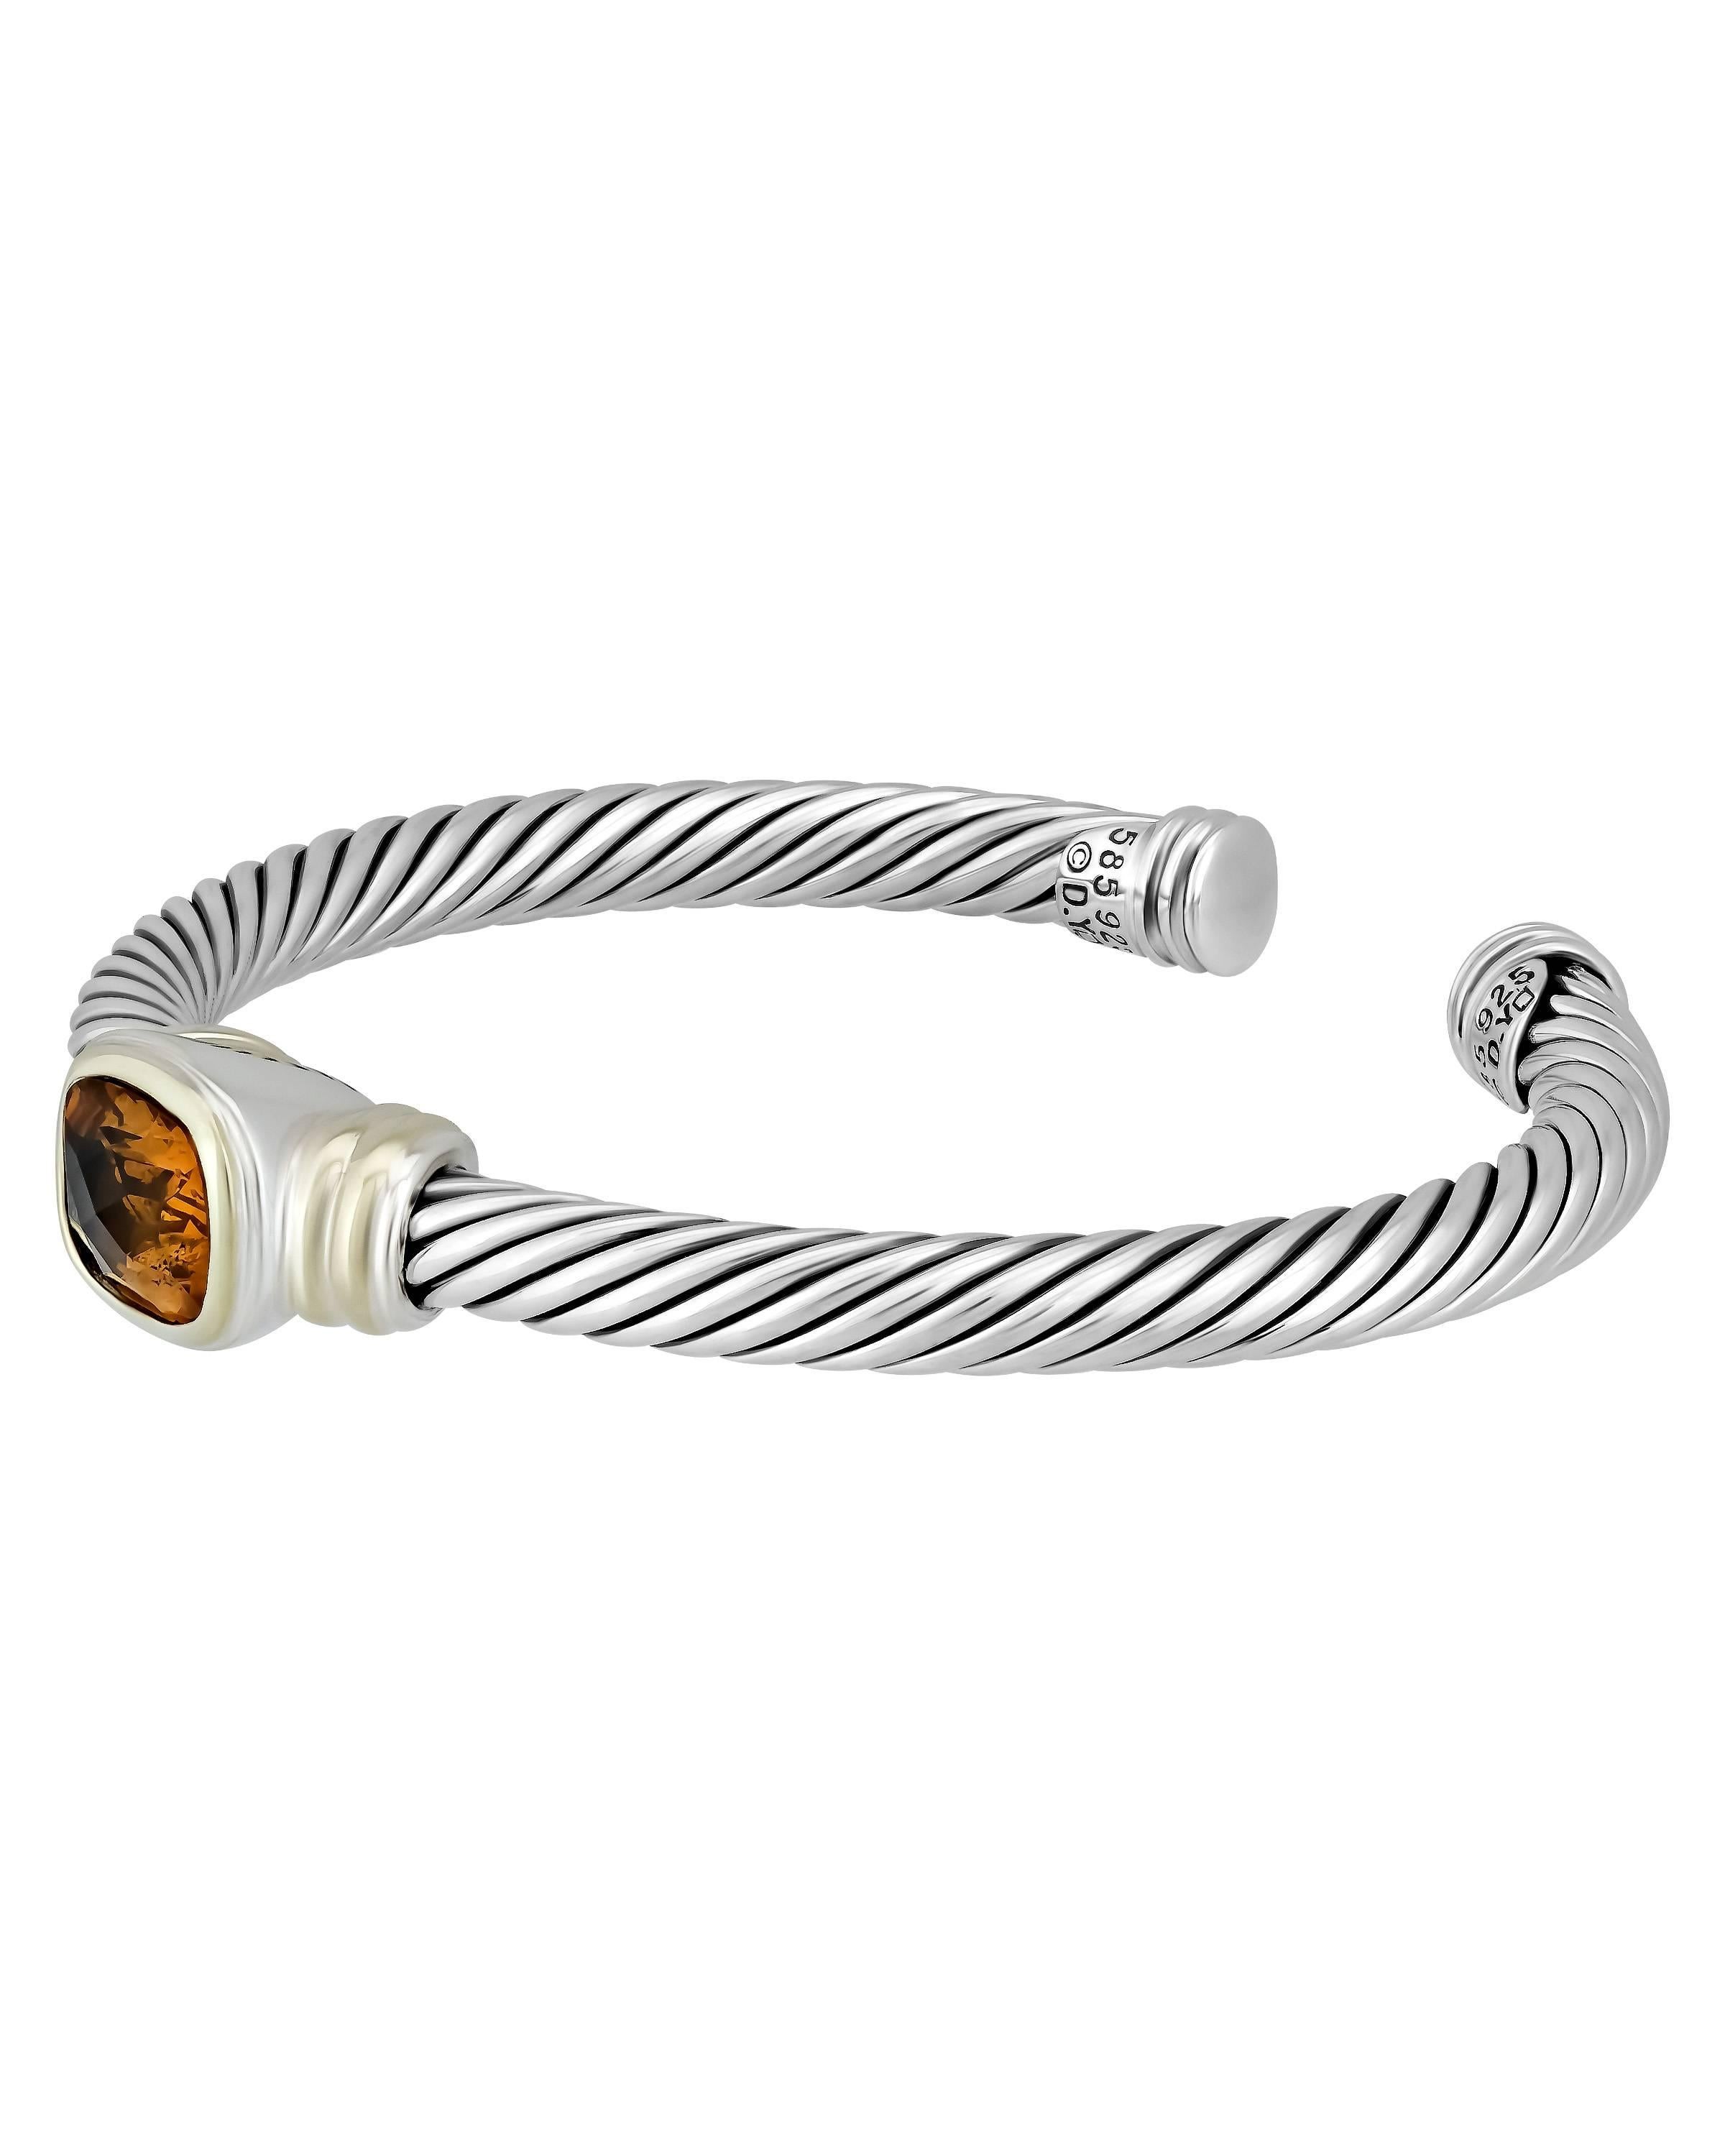 The citrus hue of the faceted citrine on the ends of this cuff bracelet is immediately enchanting, and the sterling silver cable and yellow gold complement it beautifully.

METAL TYPE: 14K Sterling Silver
TOTAL WEIGHT: 31.3g